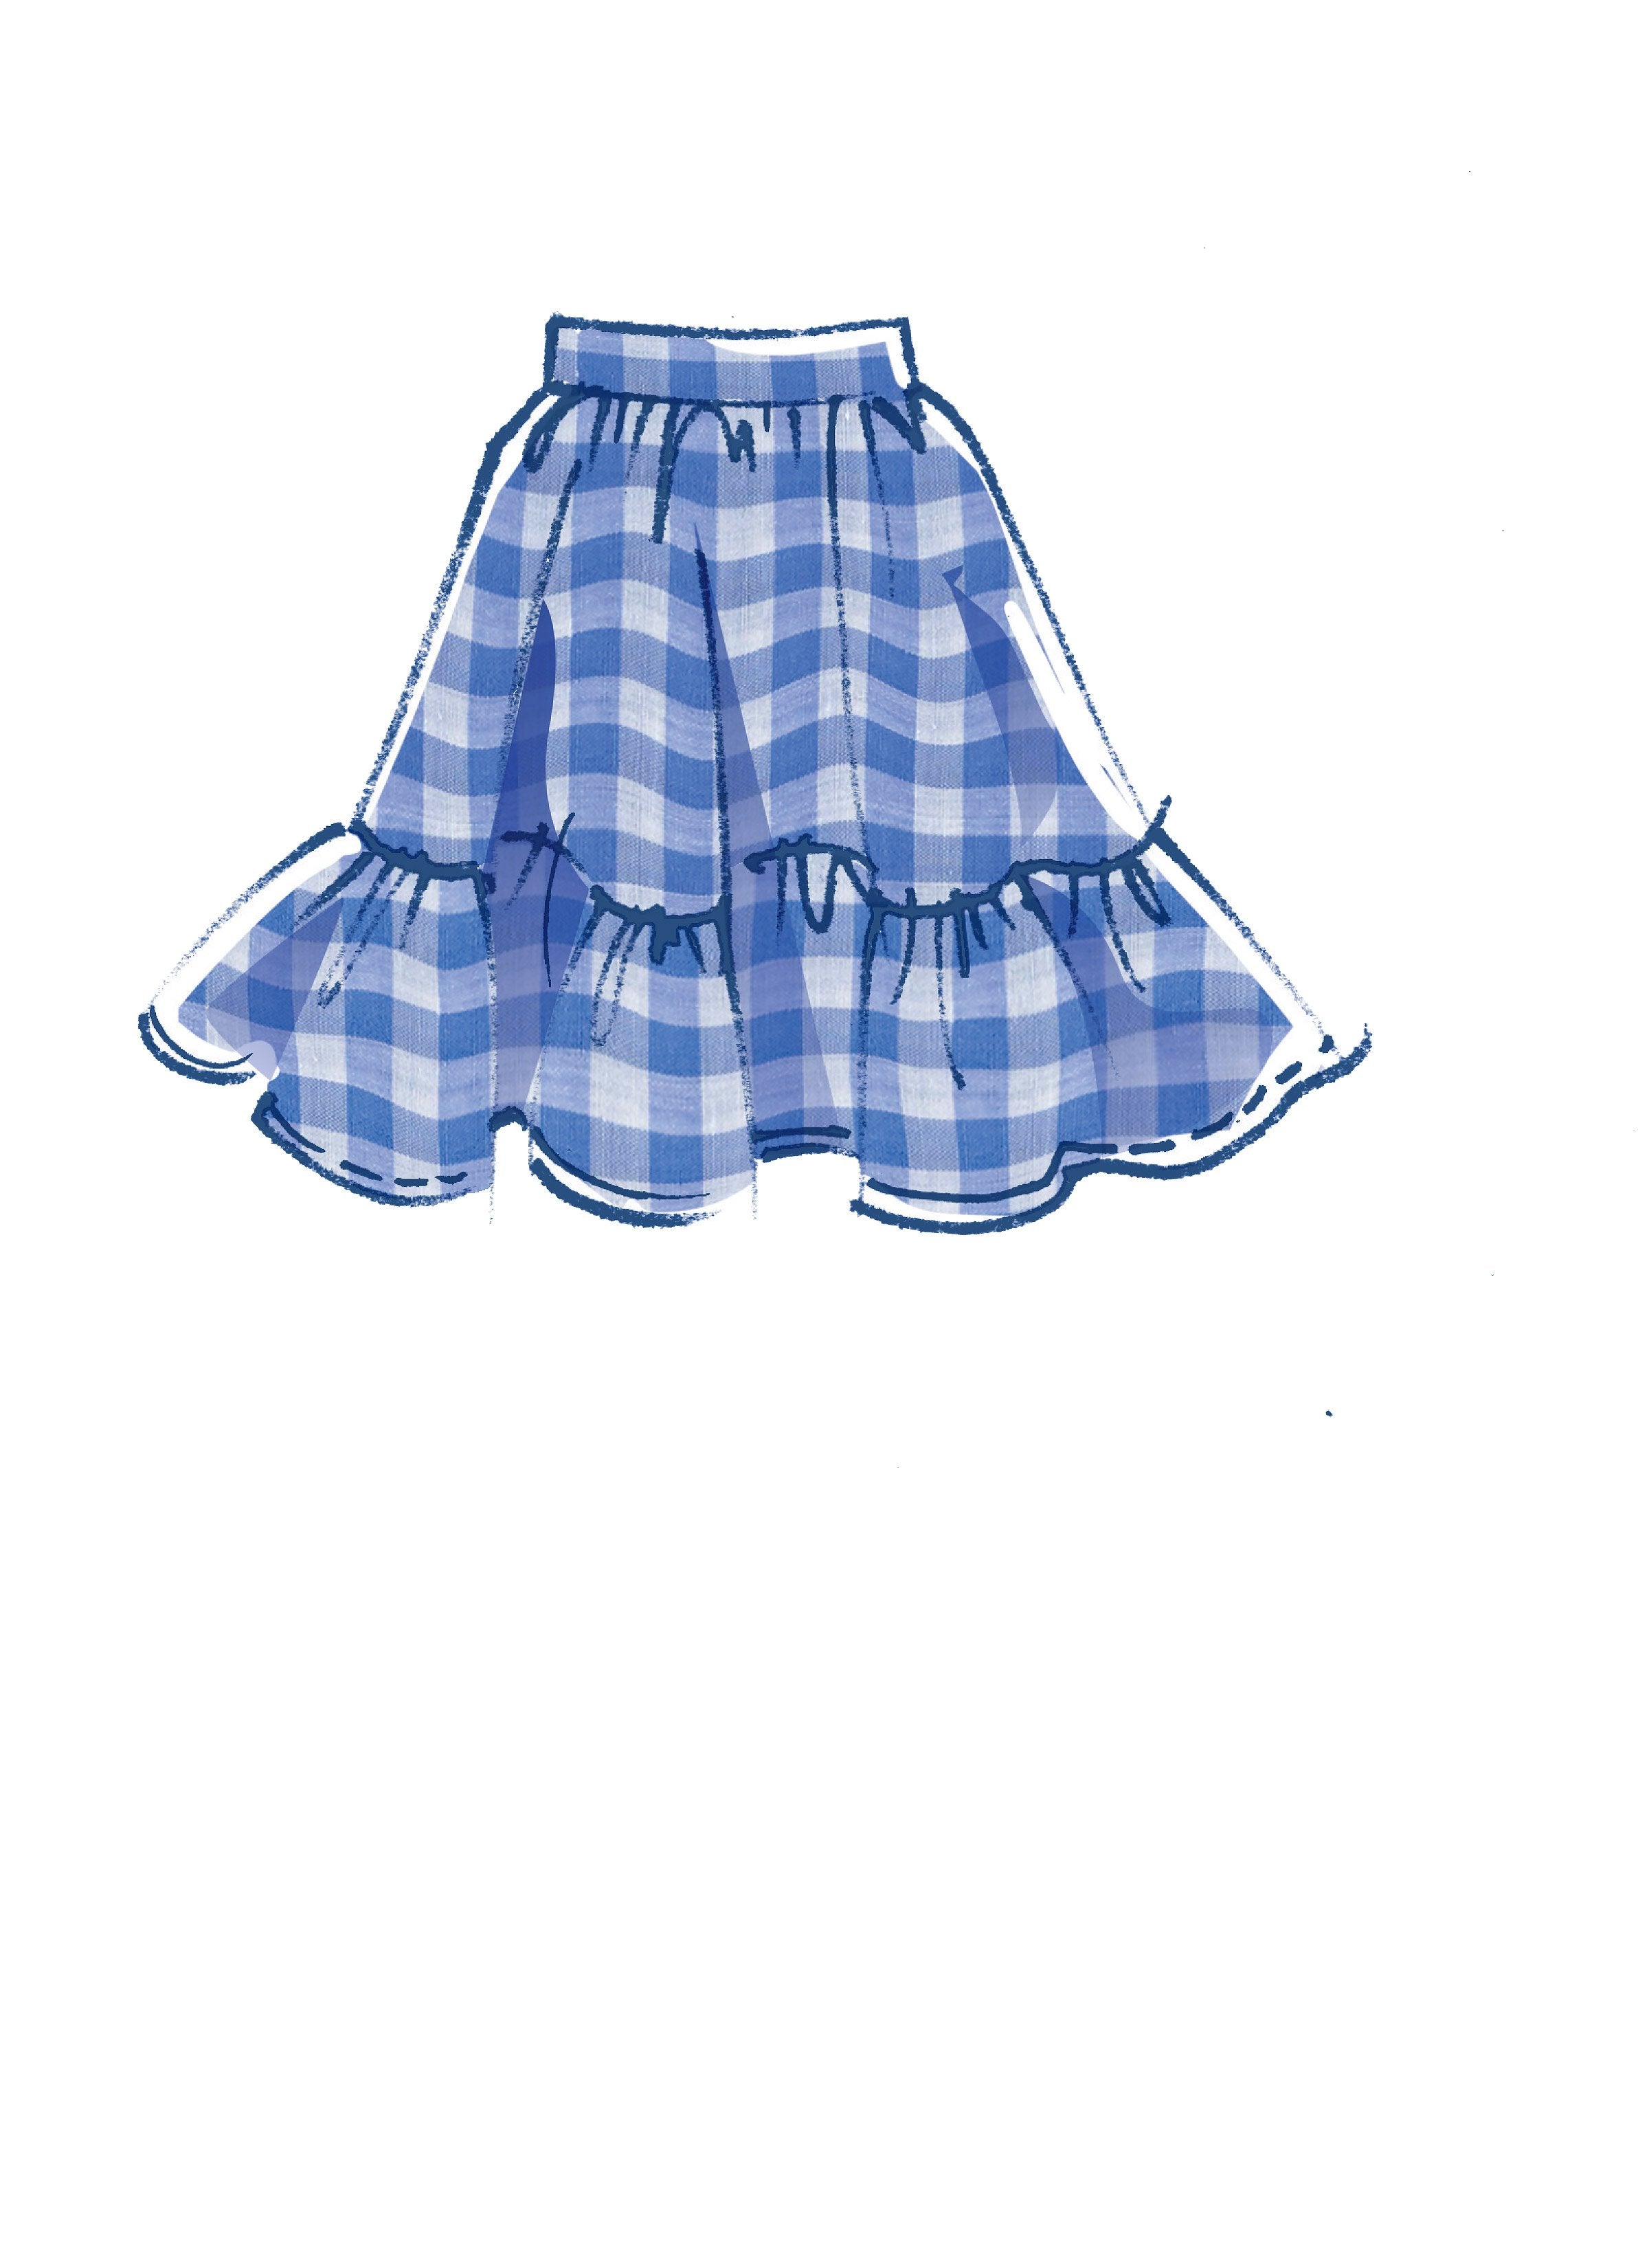 McCall's pattern 8066 Pull-On Gathered Skirts with Variations from Jaycotts Sewing Supplies